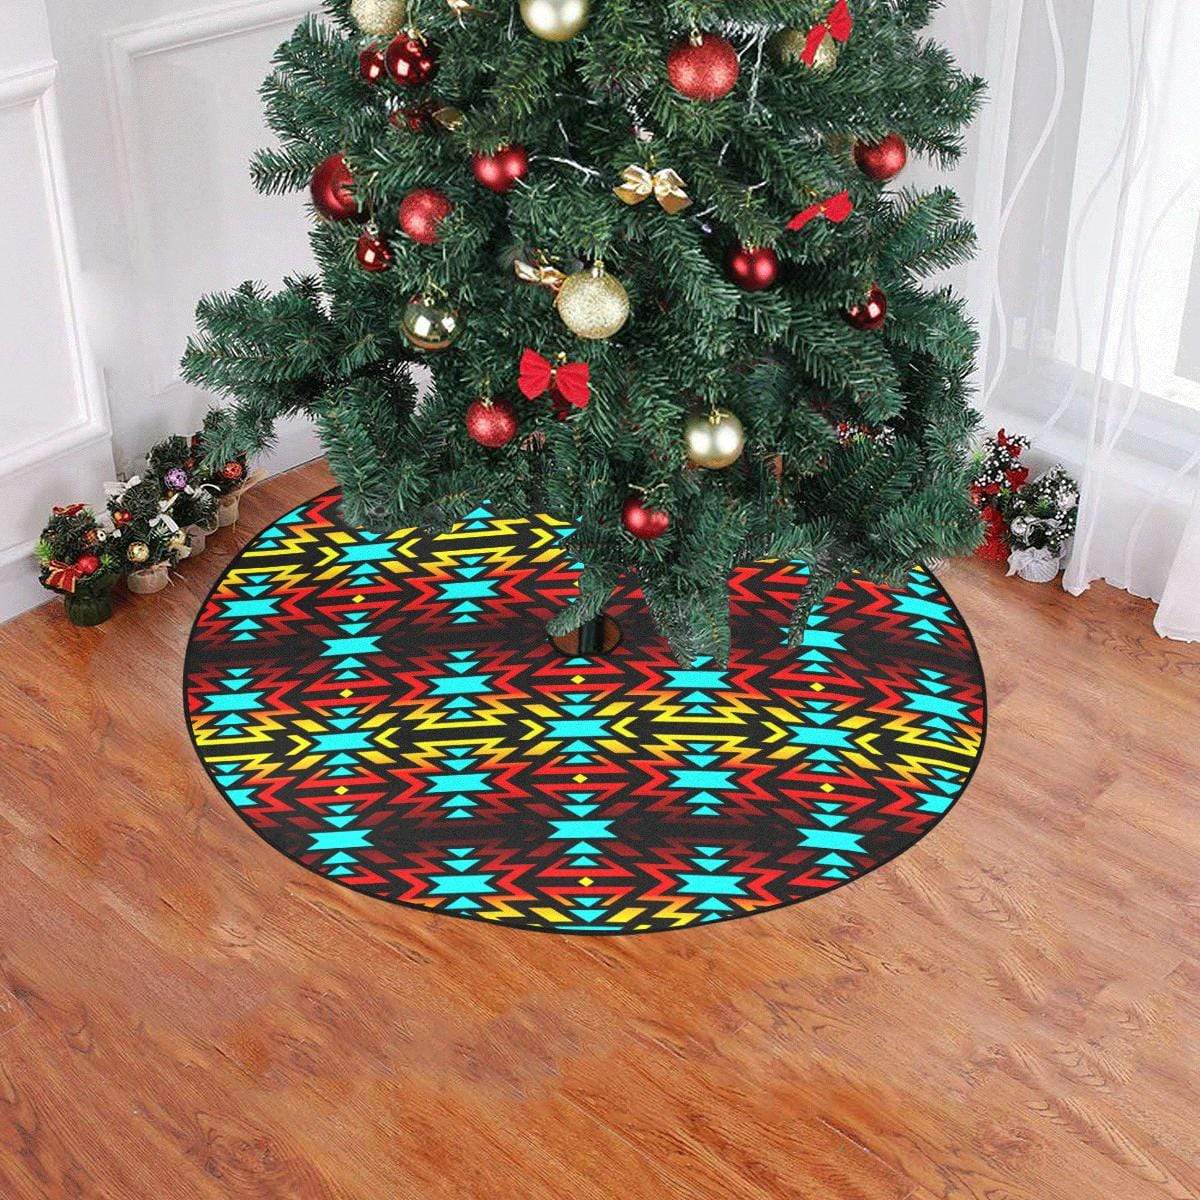 Black Fire and Turquoise Christmas Tree Skirt 47" x 47" Christmas Tree Skirt e-joyer 